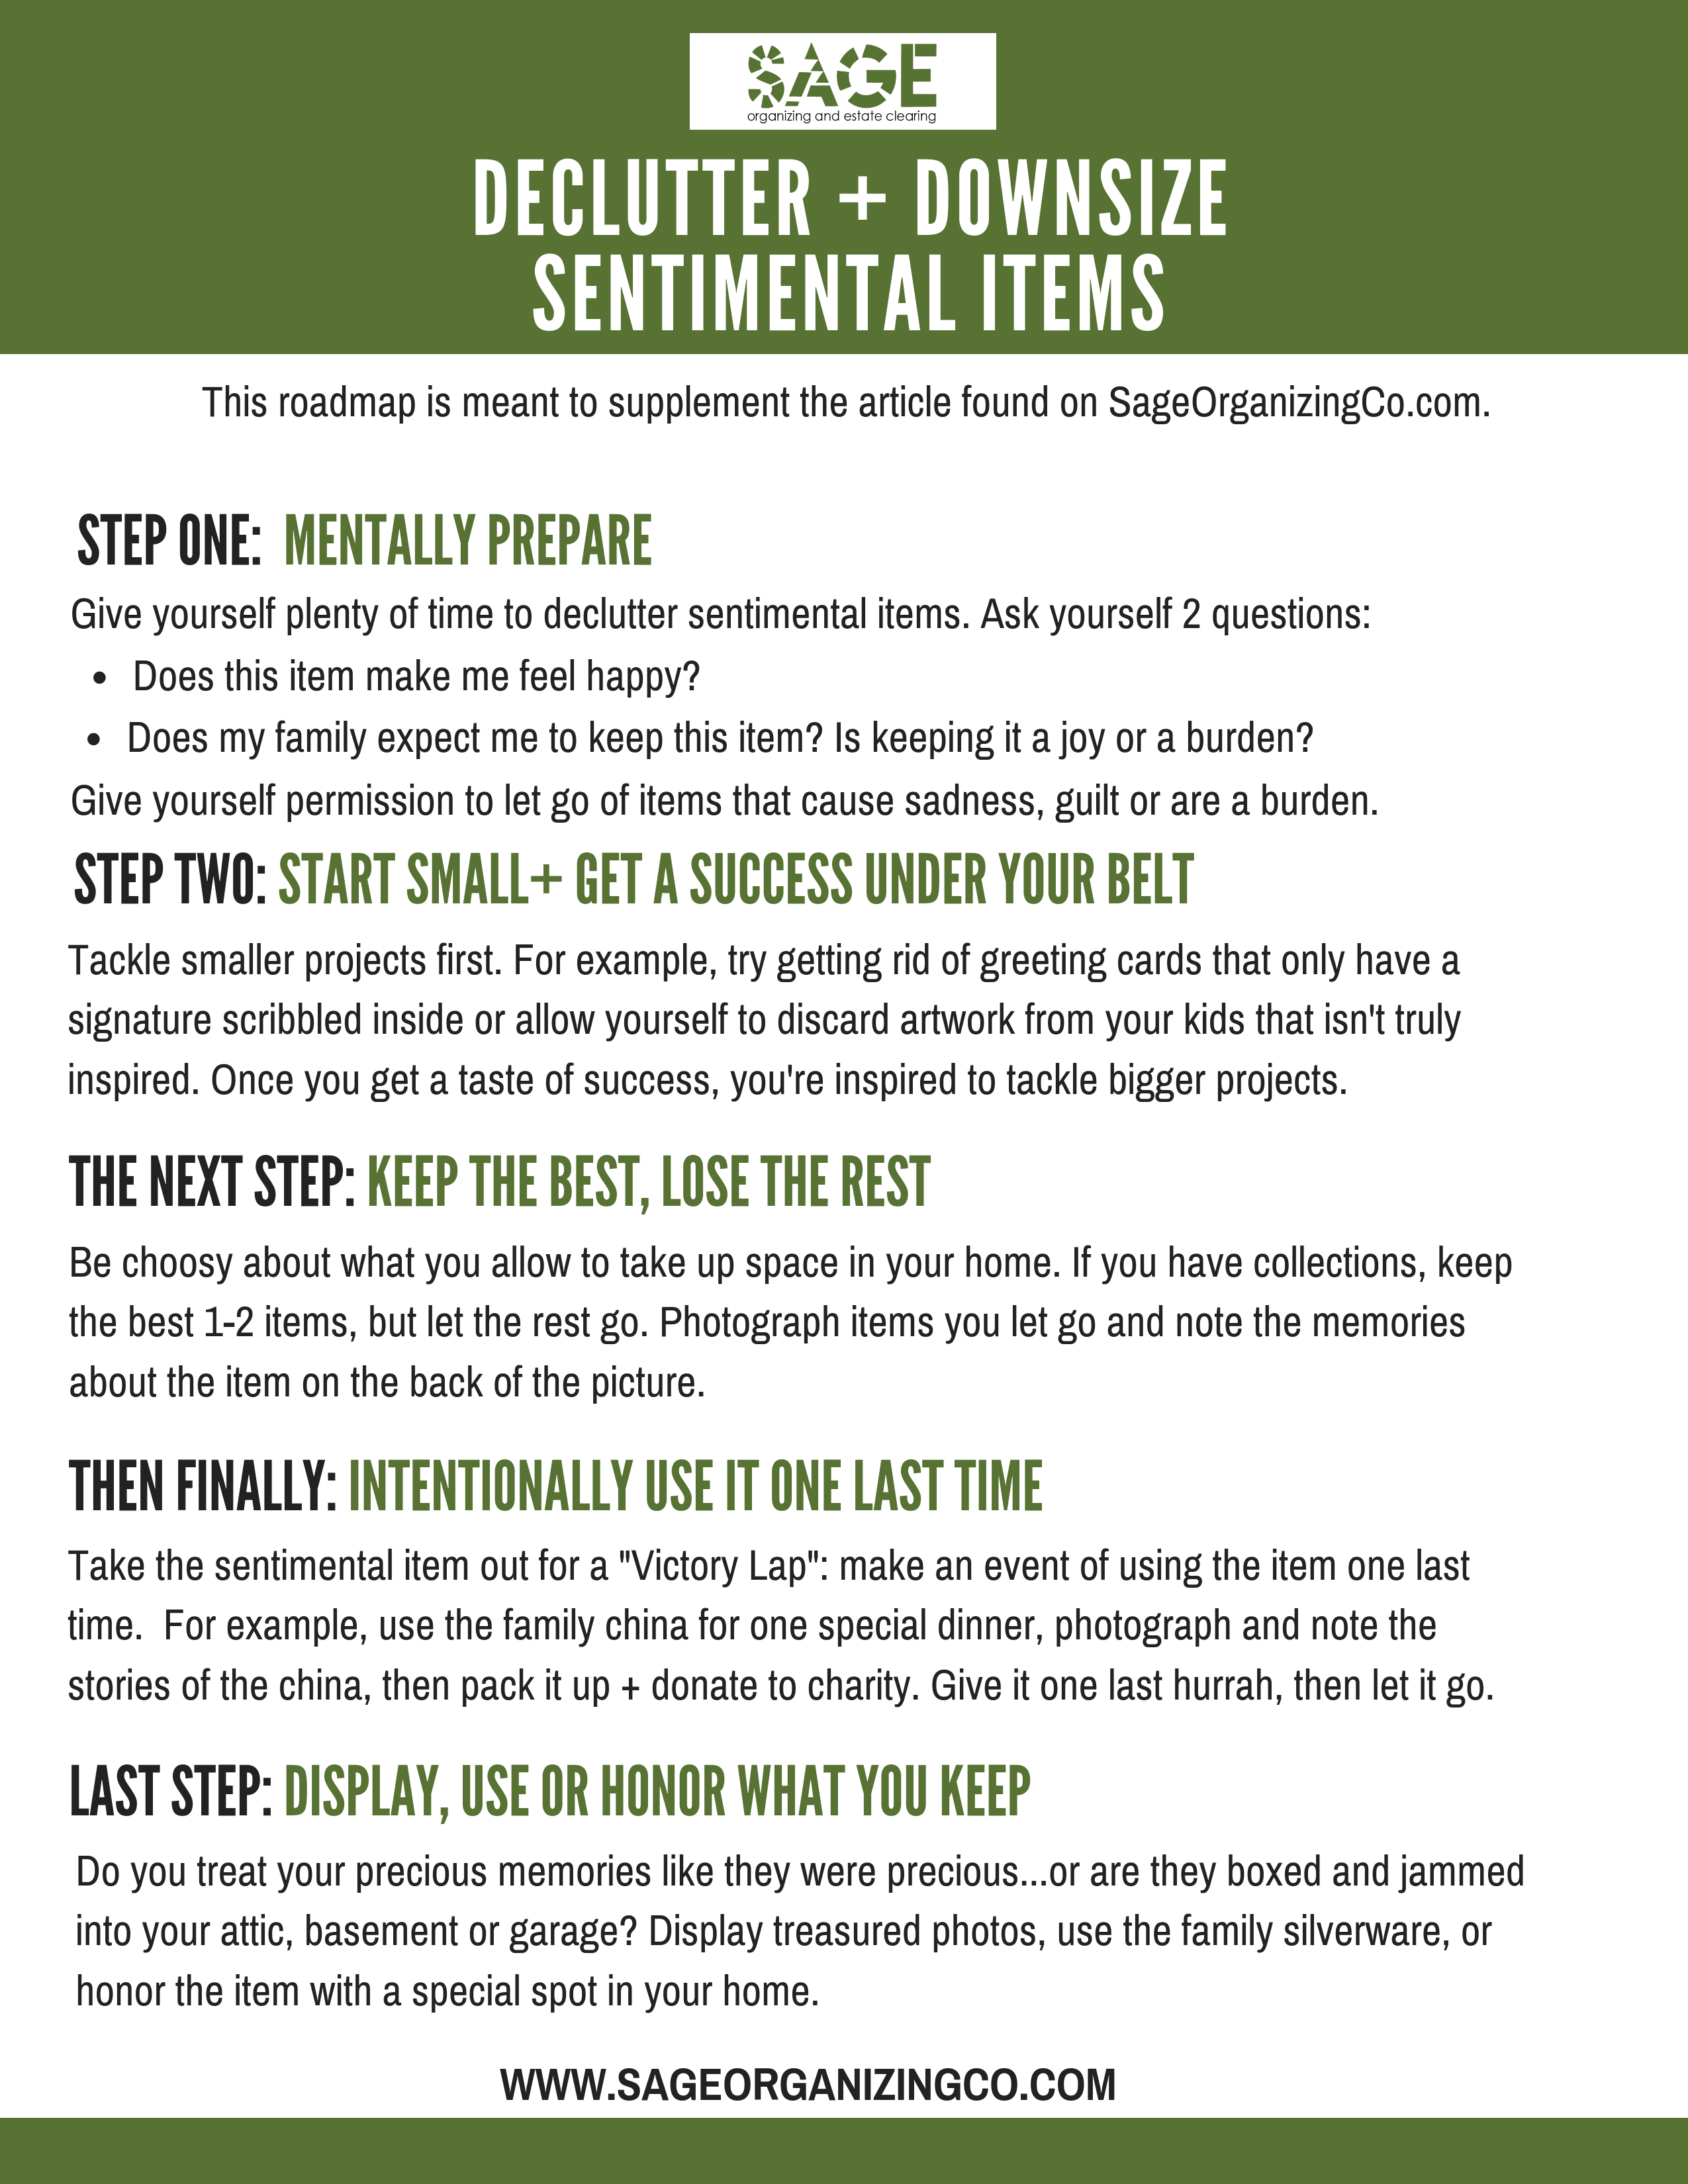 How to declutter sentimental items when it feels hard to let go